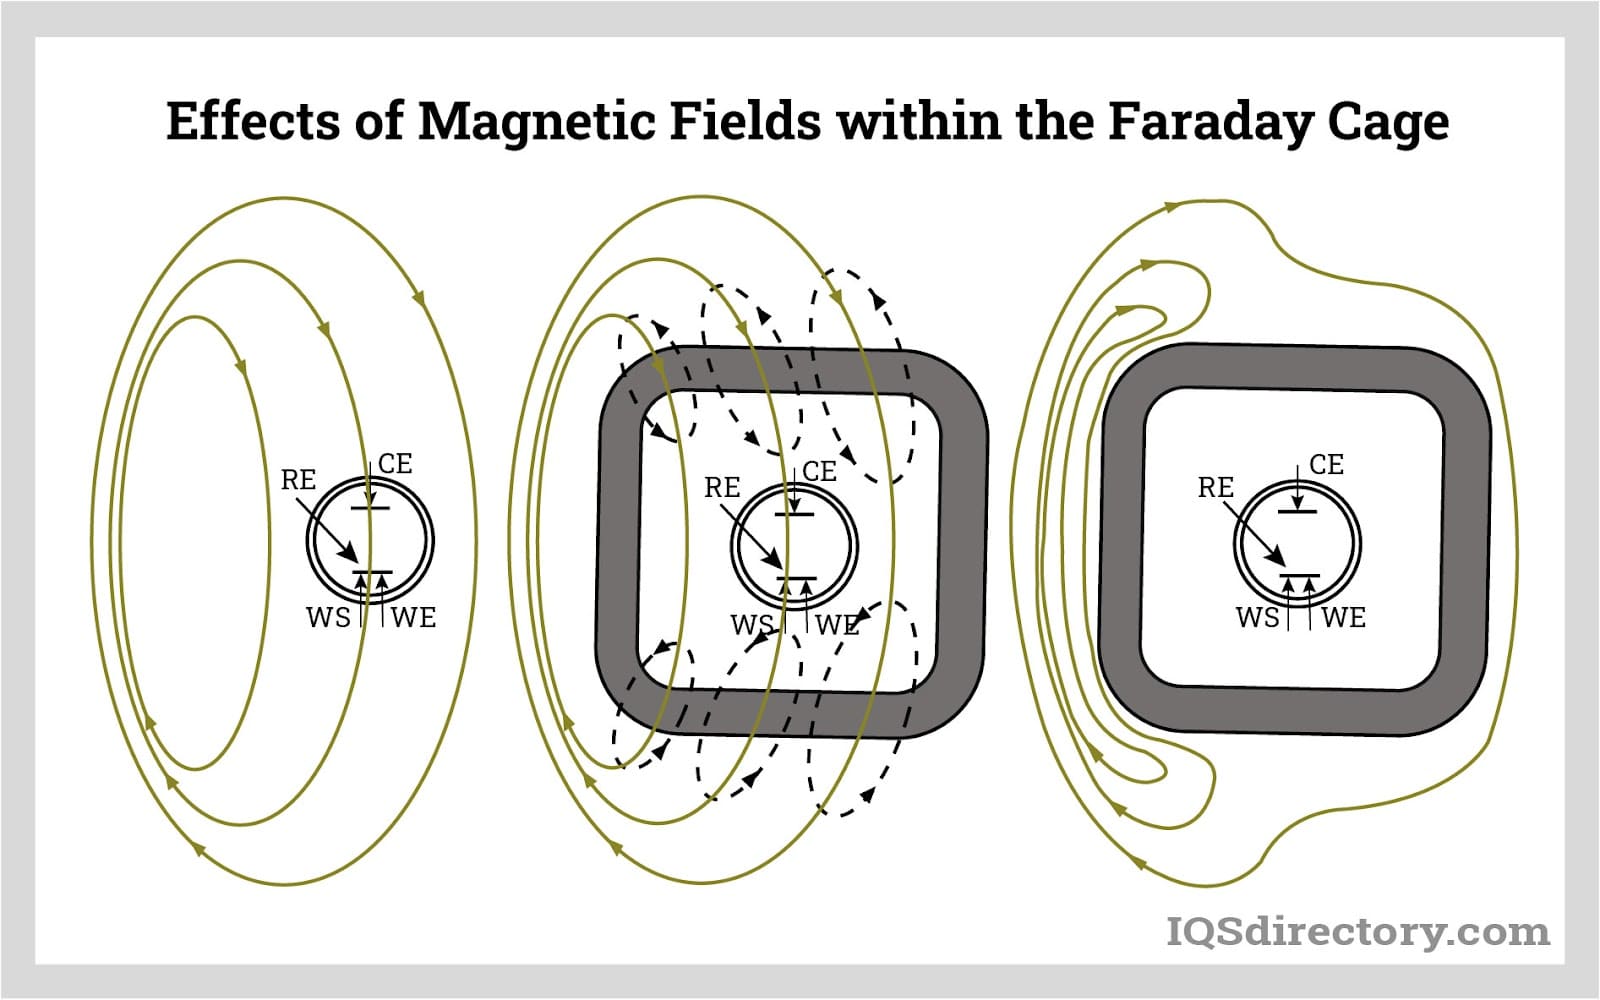 Effects of Magnetic Fields within the Faraday Cage